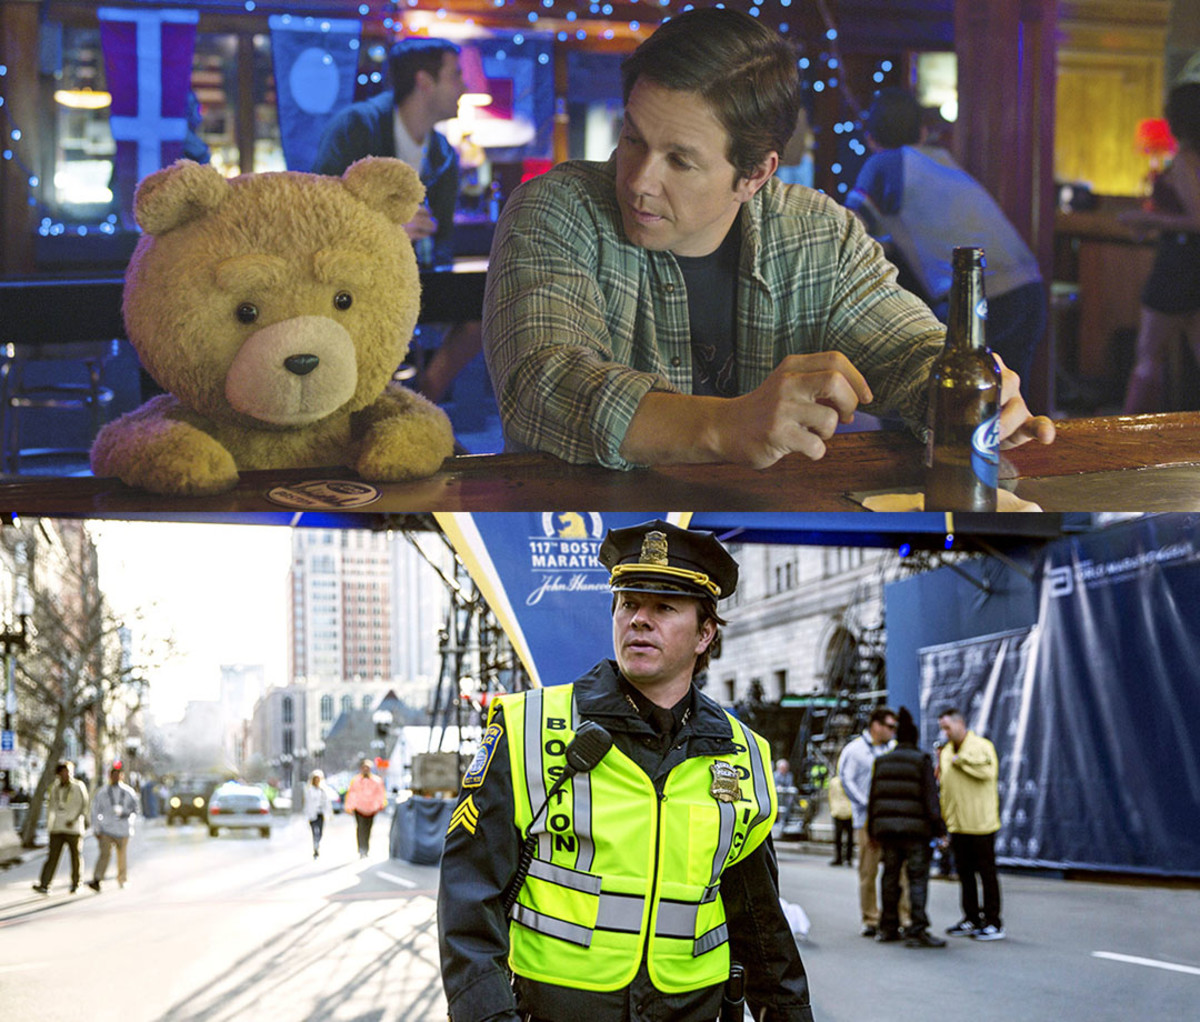 Wahlberg can play wingman ("Ted 2") just as well as hometown hero ("Patriots Day").